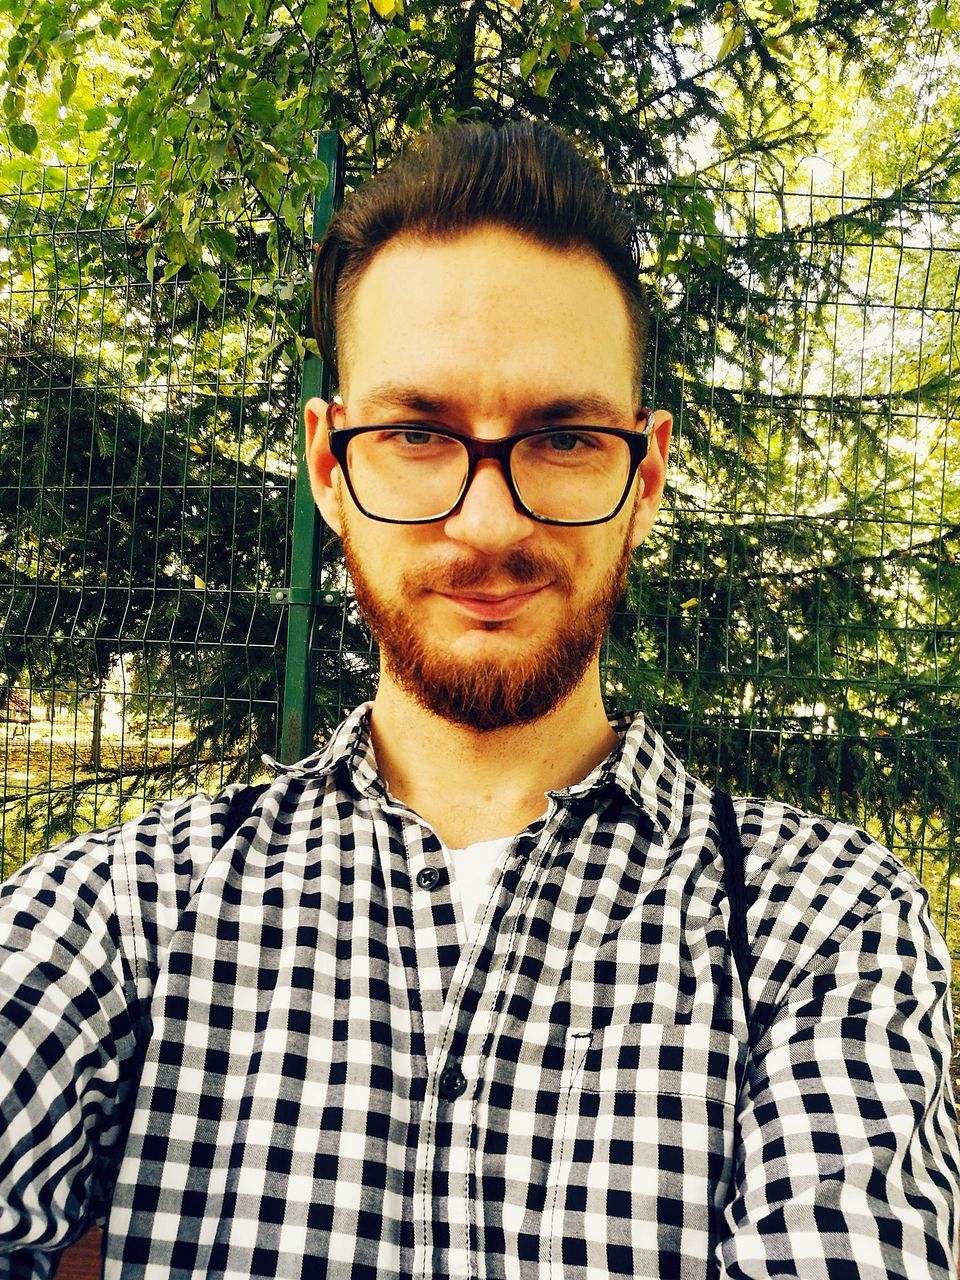 portrait, glasses, eyeglasses, looking at camera, young men, young adult, front view, one person, real people, beard, headshot, facial hair, plant, tree, leisure activity, lifestyles, nature, checked pattern, outdoors